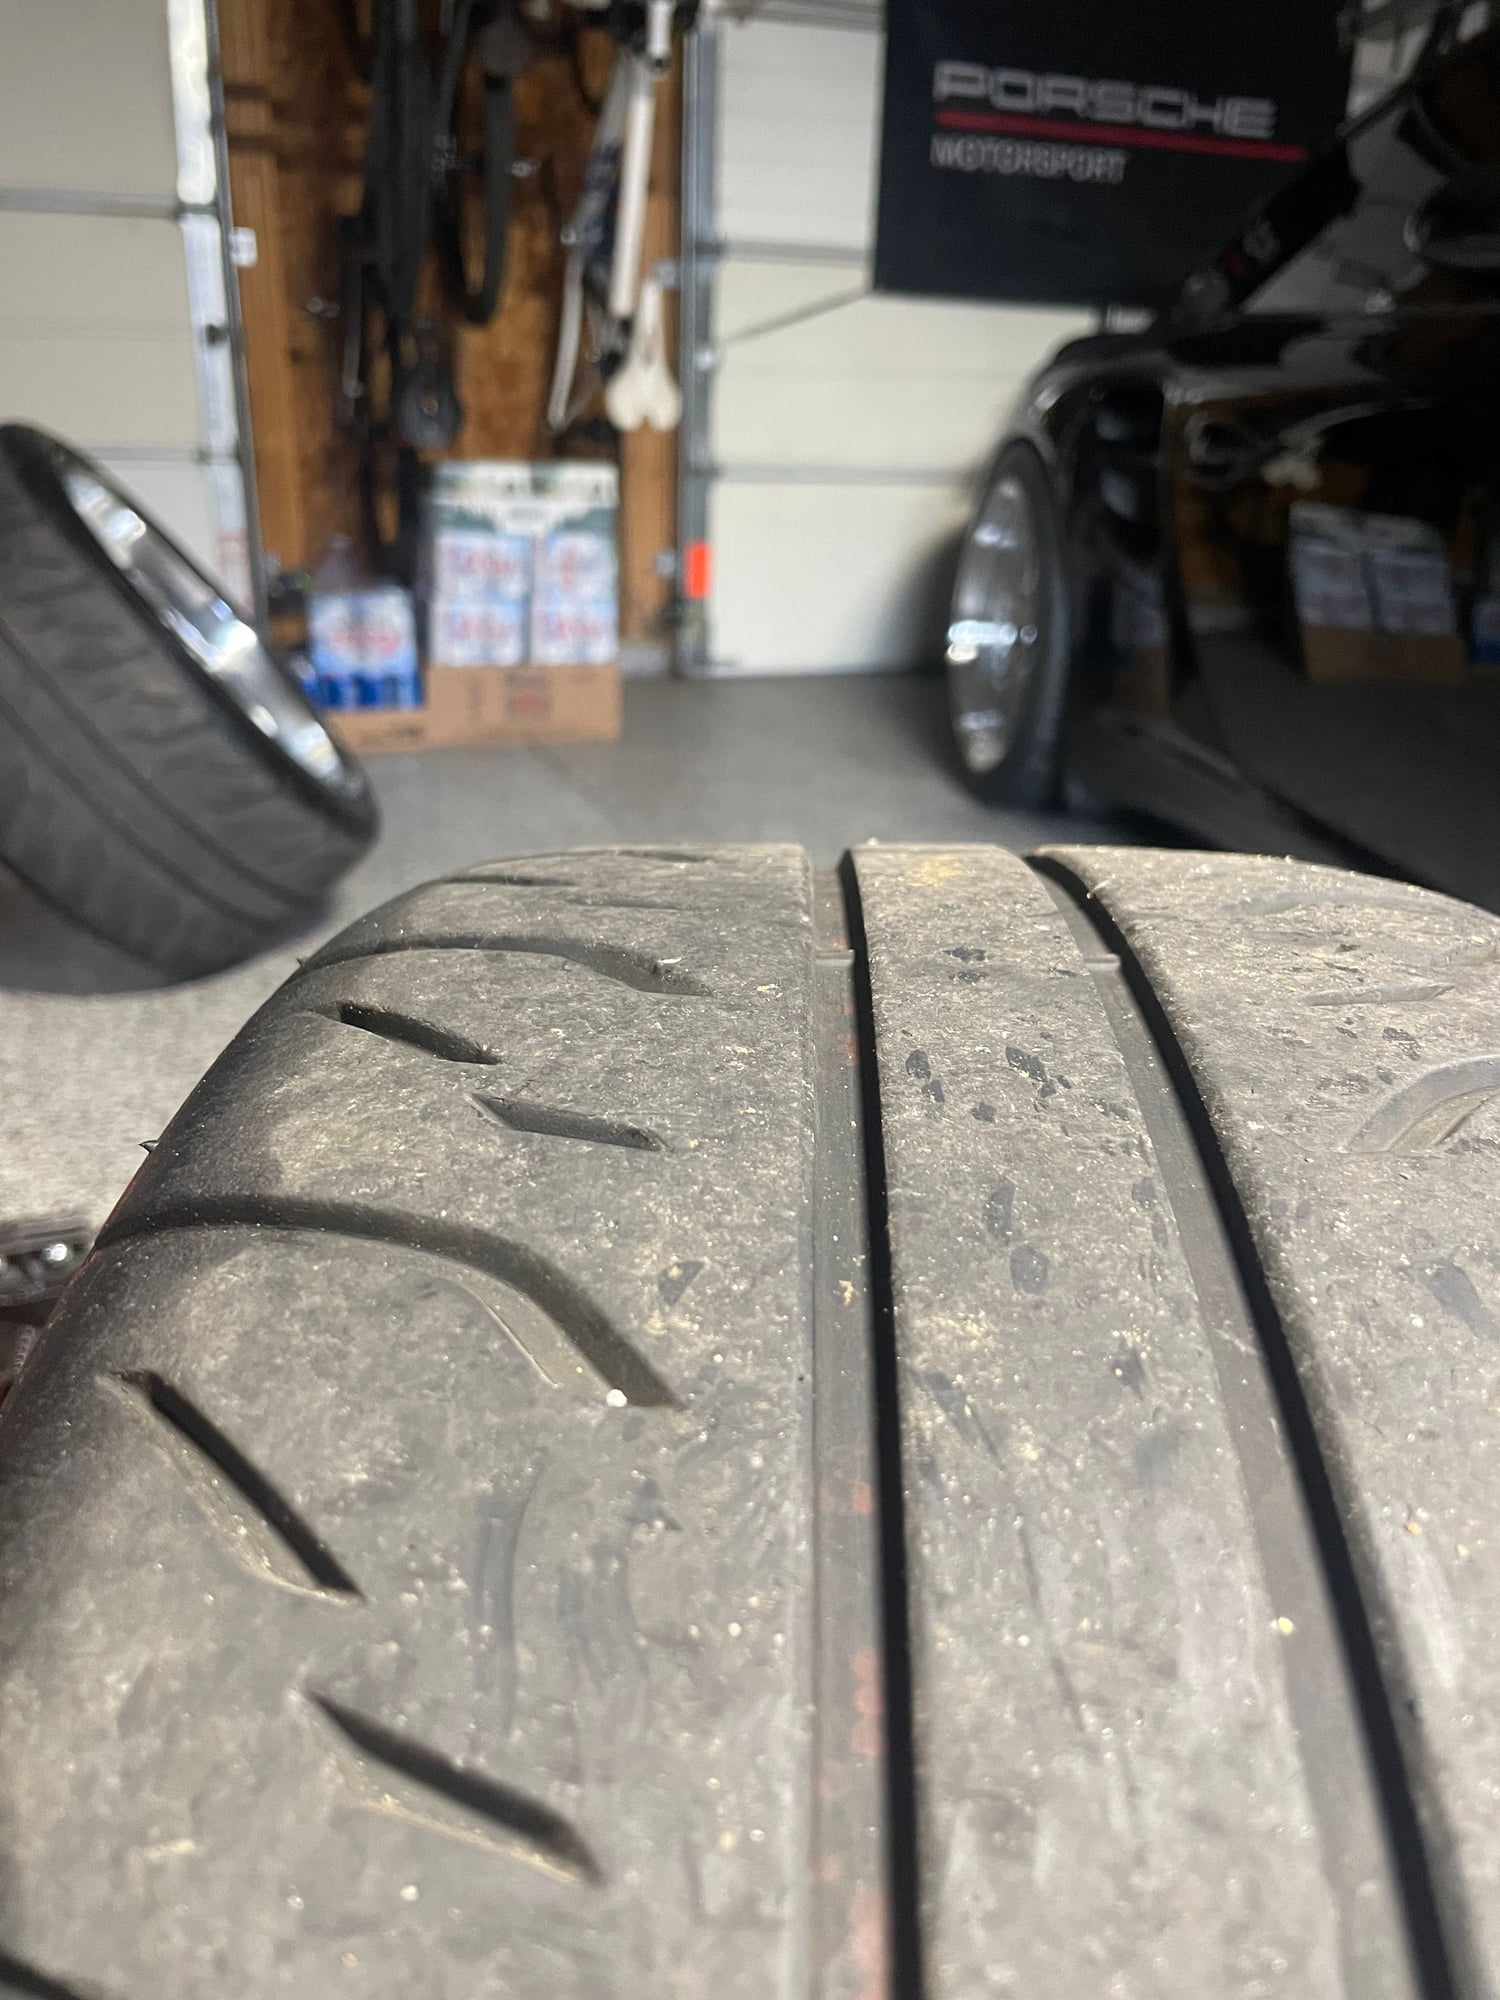 Wheels and Tires/Axles - Champion Motorsport Forged Monolite RS98 Wheels w/ Bridgestone RE-71R Tires - Used - 1997 to 2011 Porsche 911 - Denver, CO 80212, United States